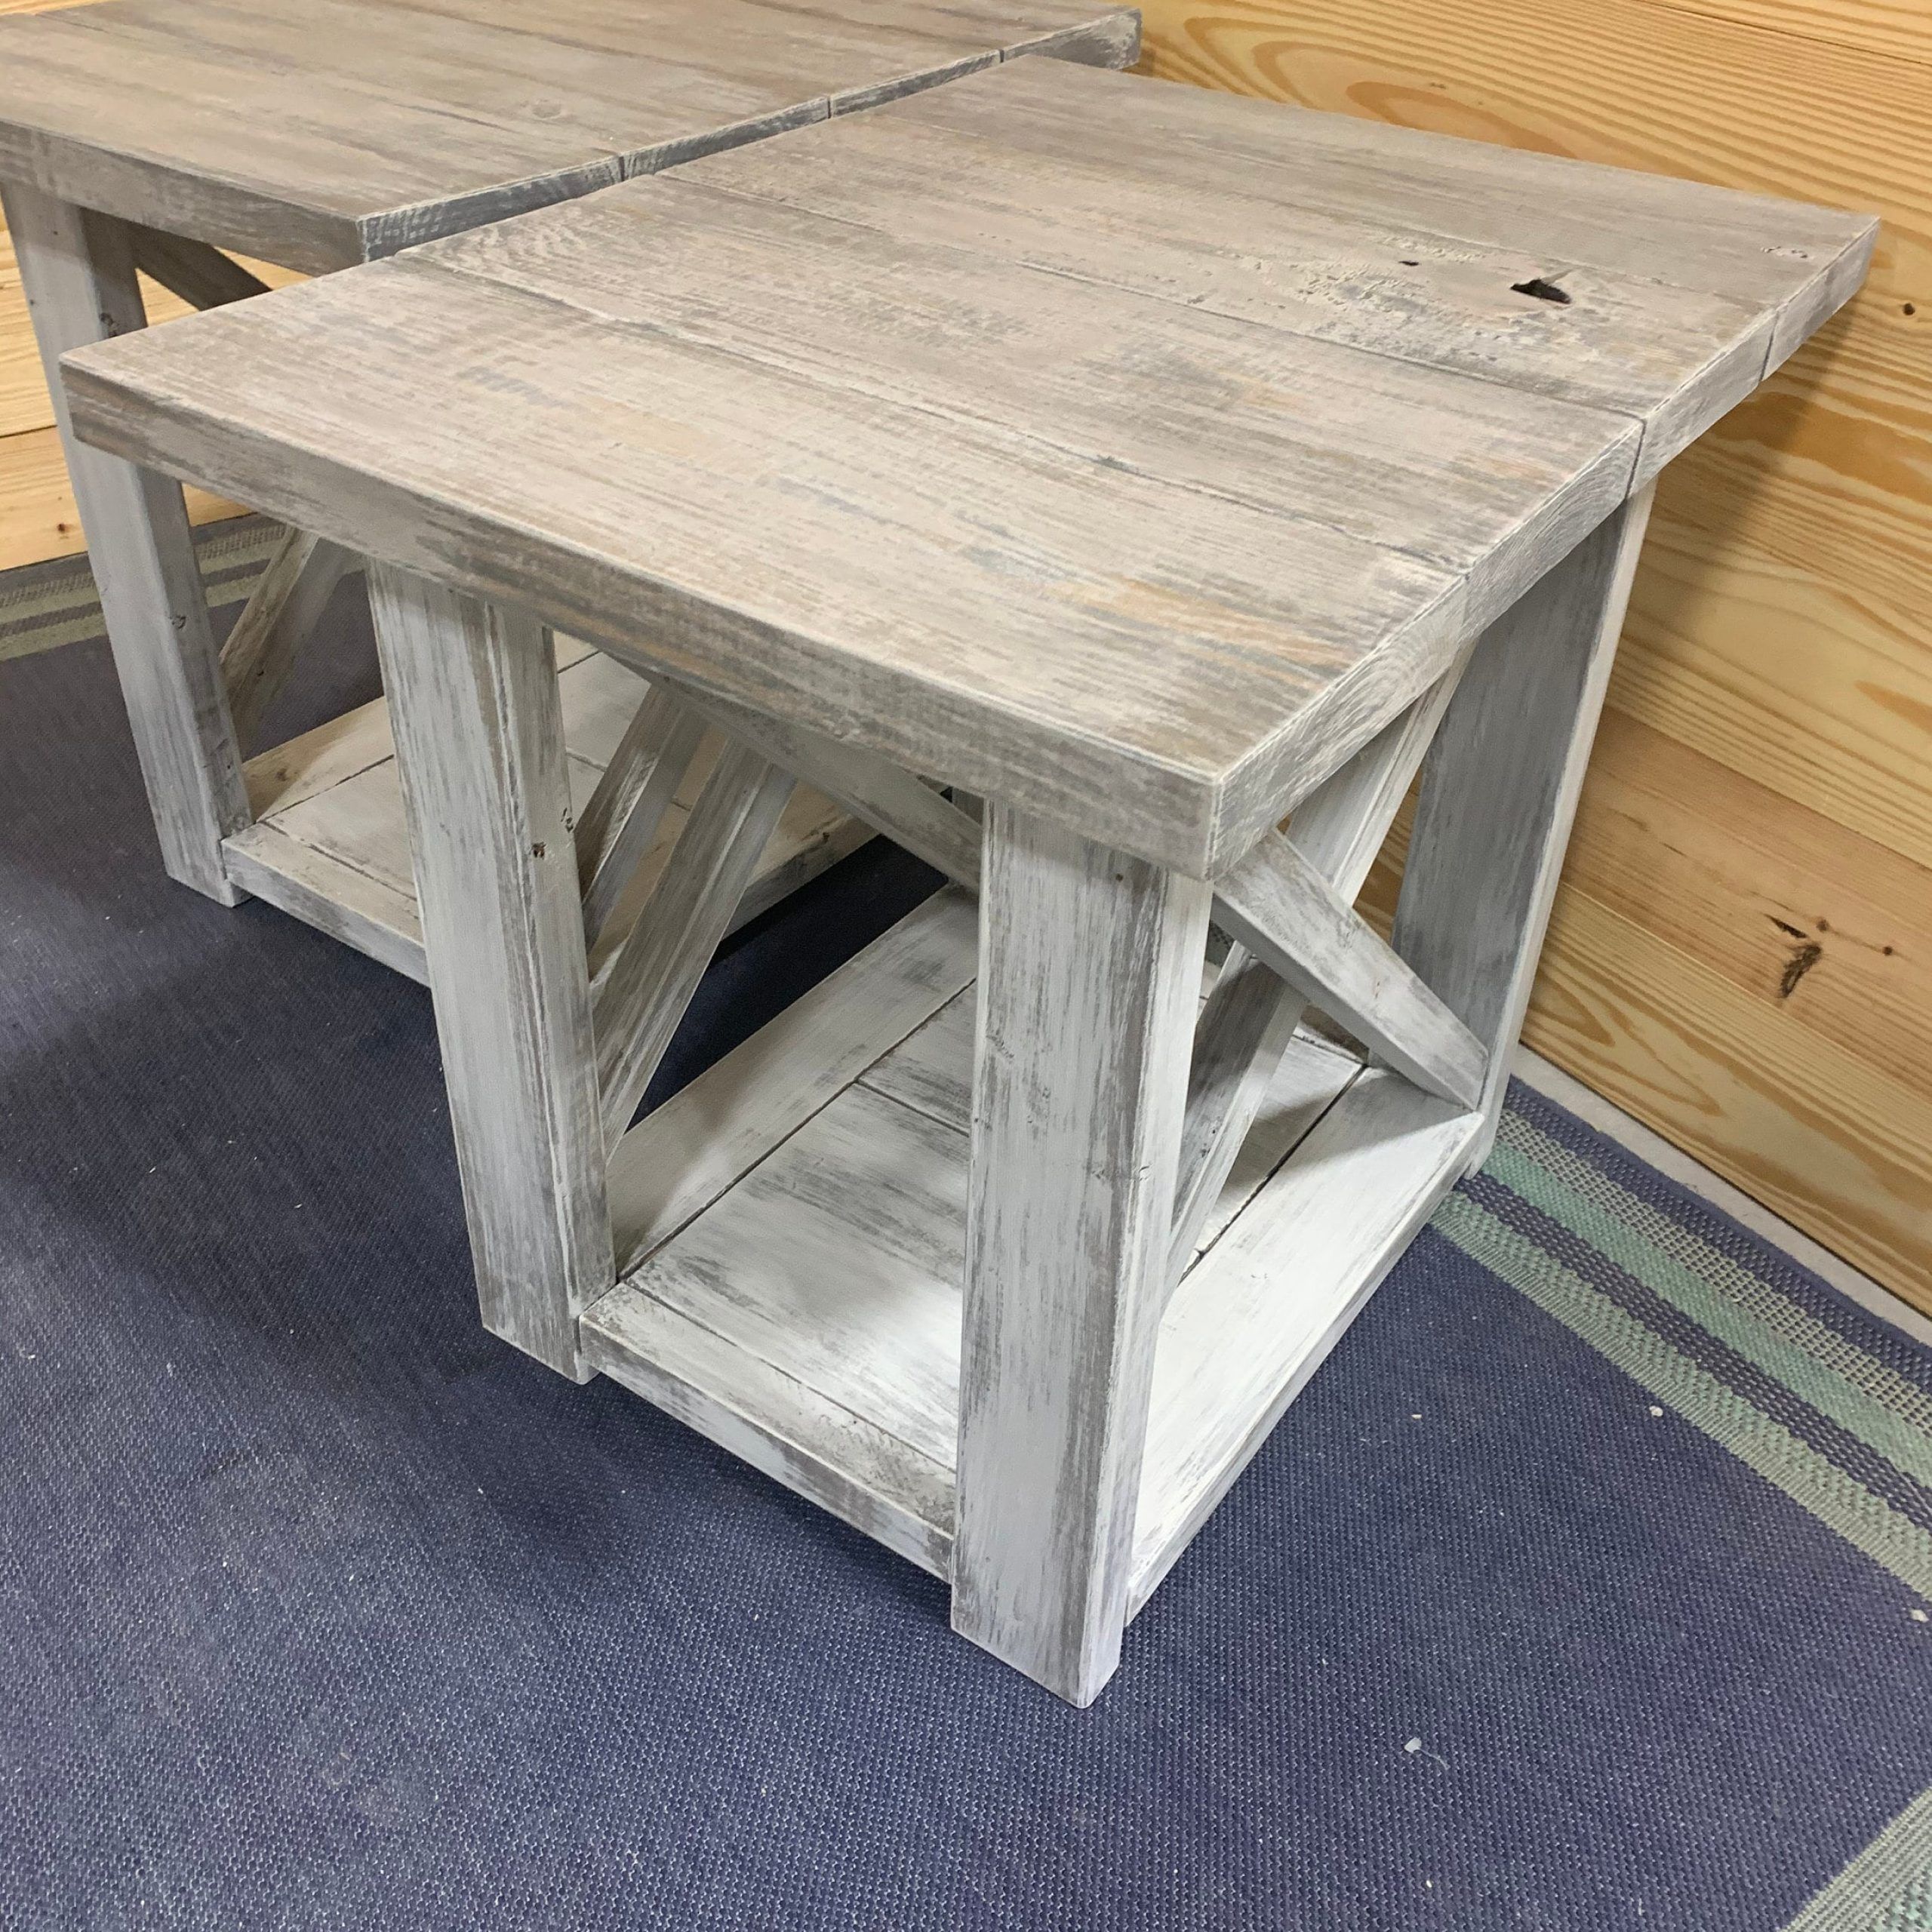 Long Rustic Farmhouse End Tables Gray White Wash Top With A Distressed Regarding Rustic Gray End Tables (View 4 of 20)